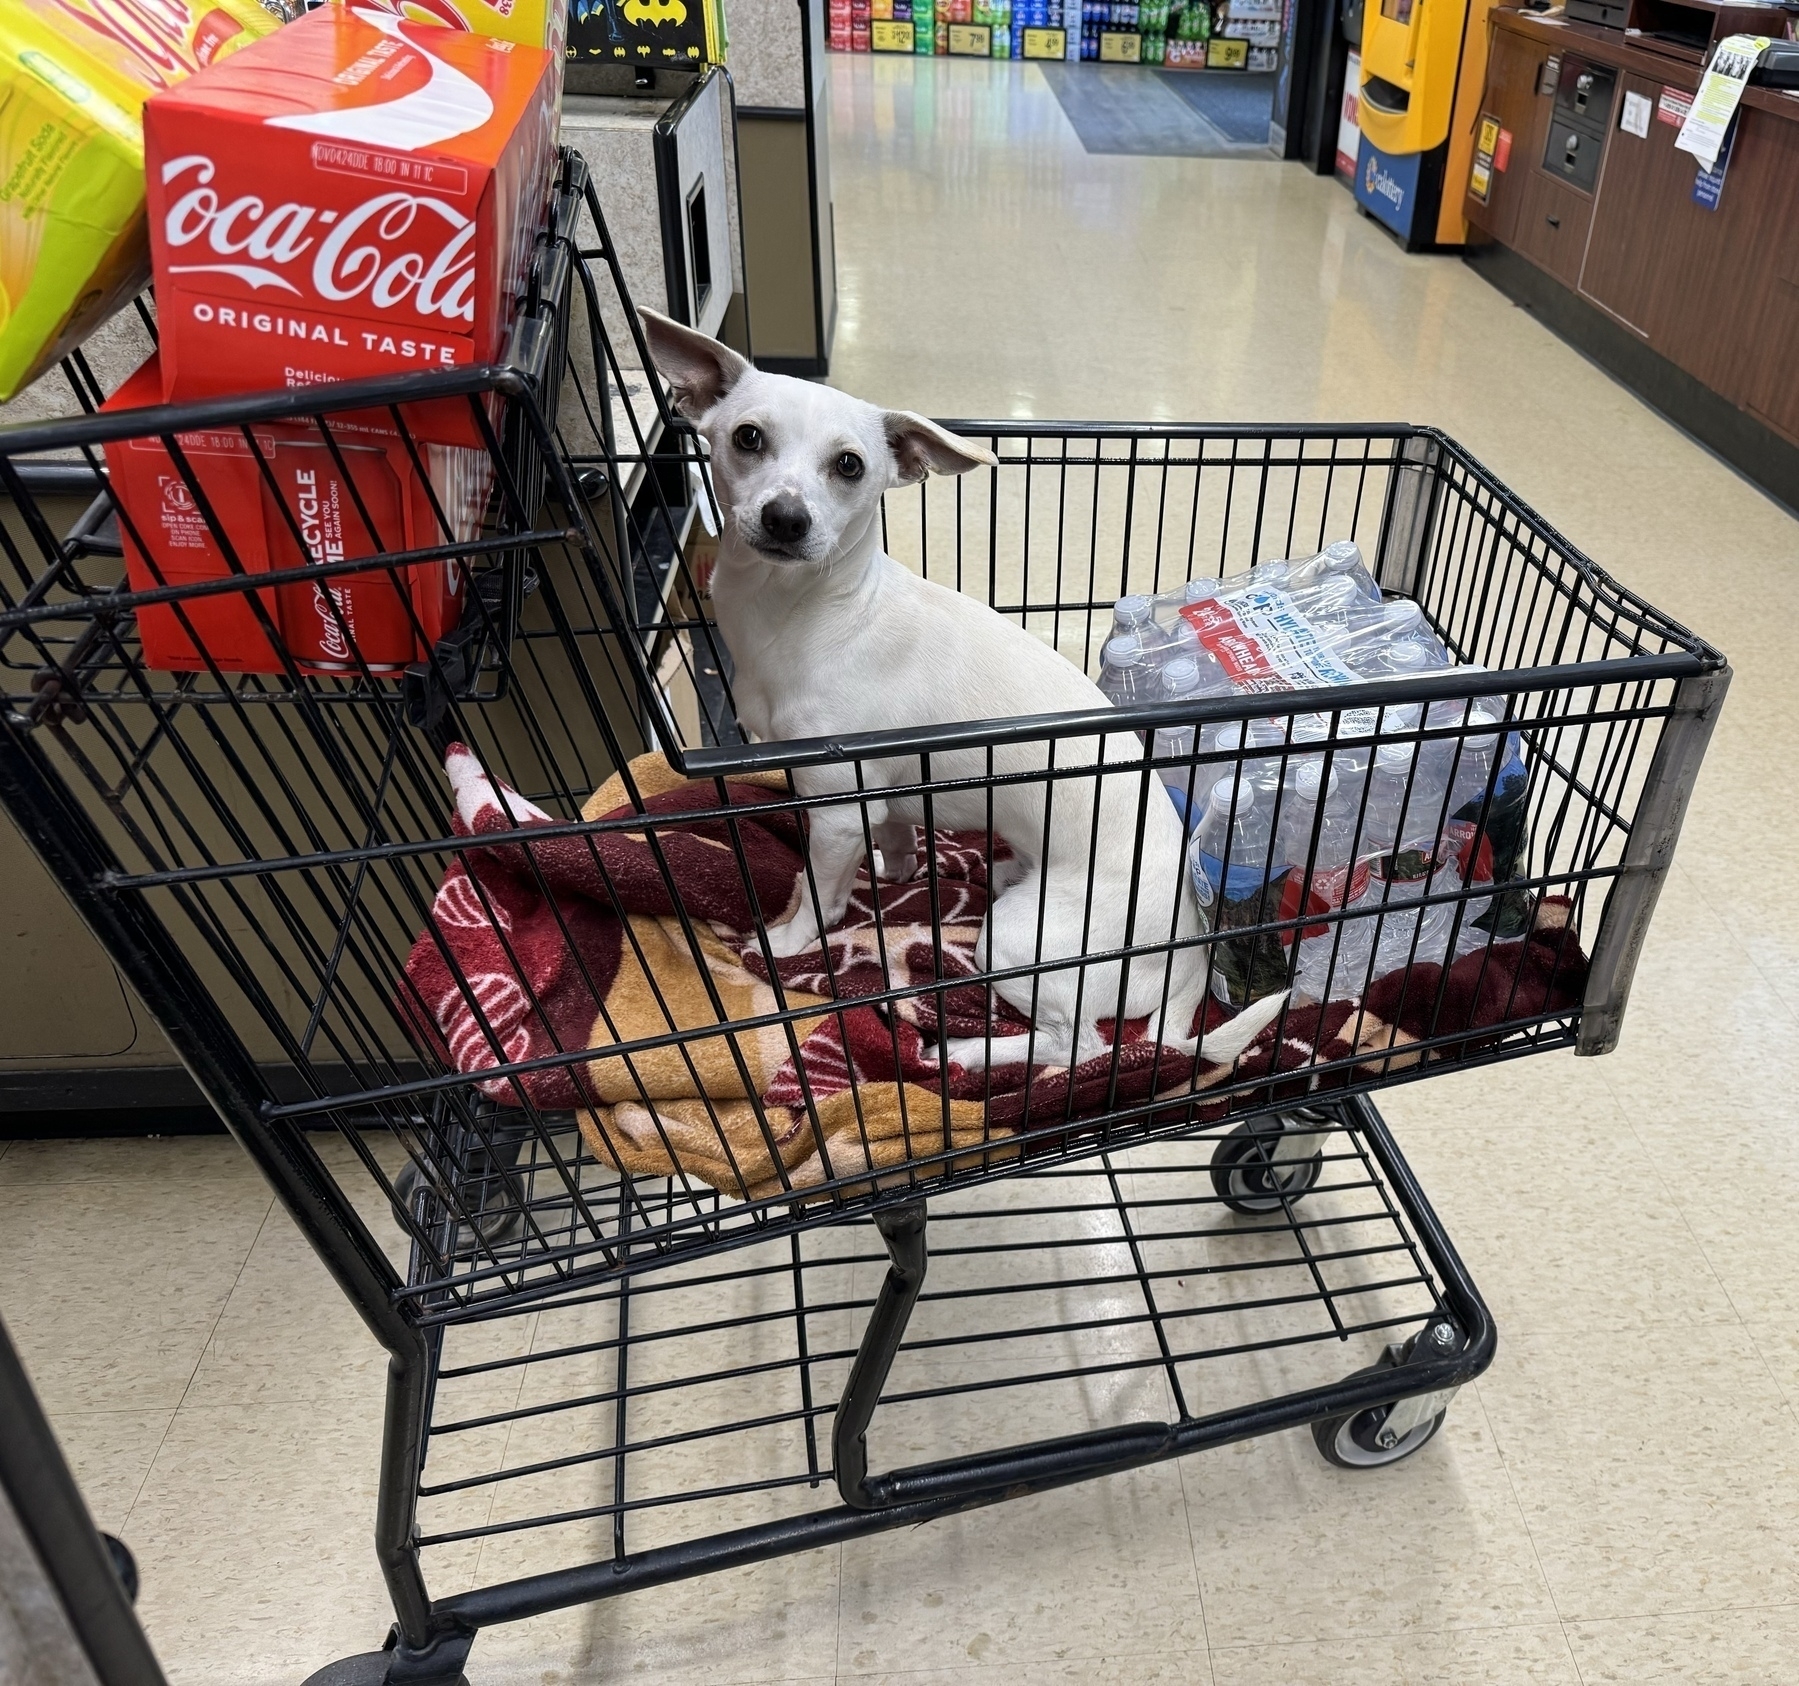 A cute little white dog in a shopping cart with a neatly folded towel beneath him as a cushion. ￼